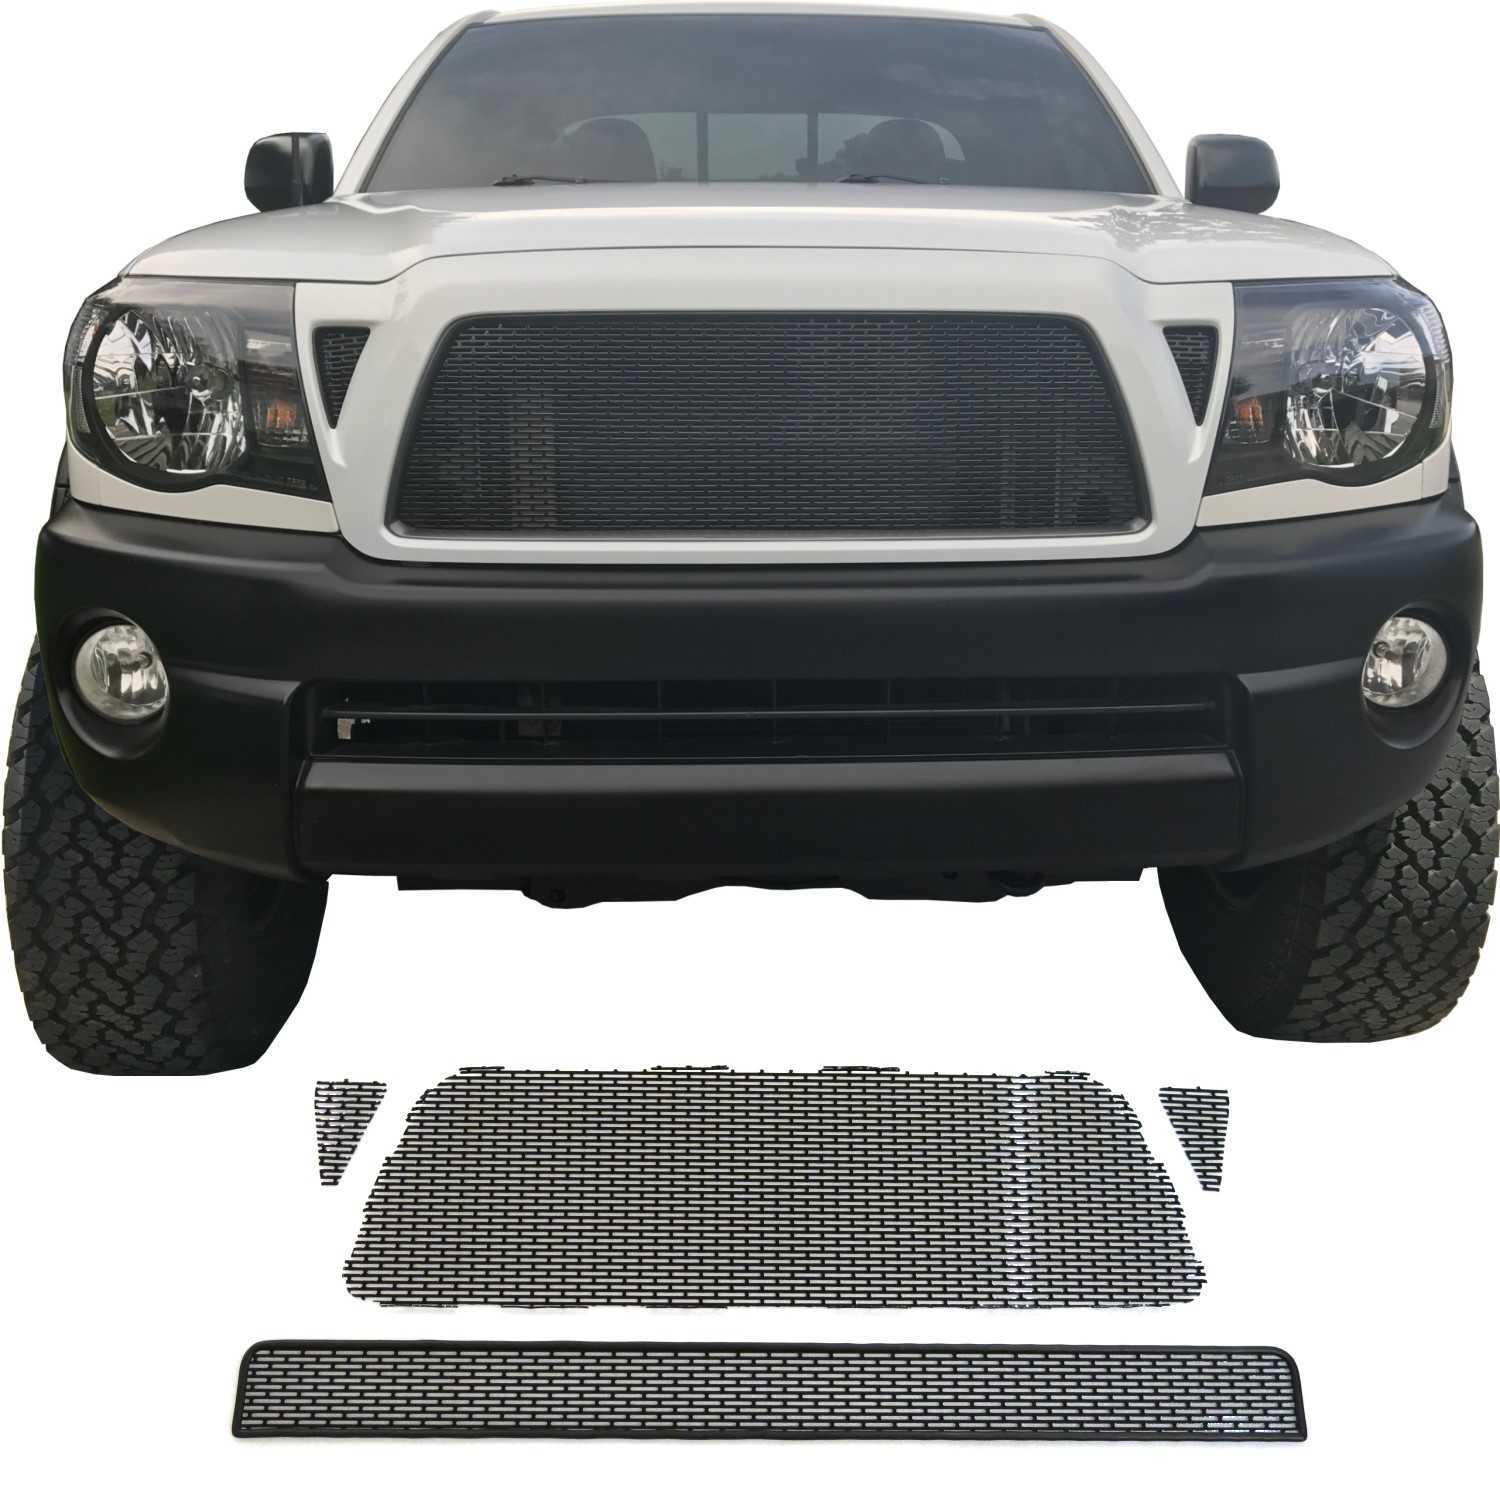 2005 - 2011 Toyota Tacoma Mesh Grill Builder